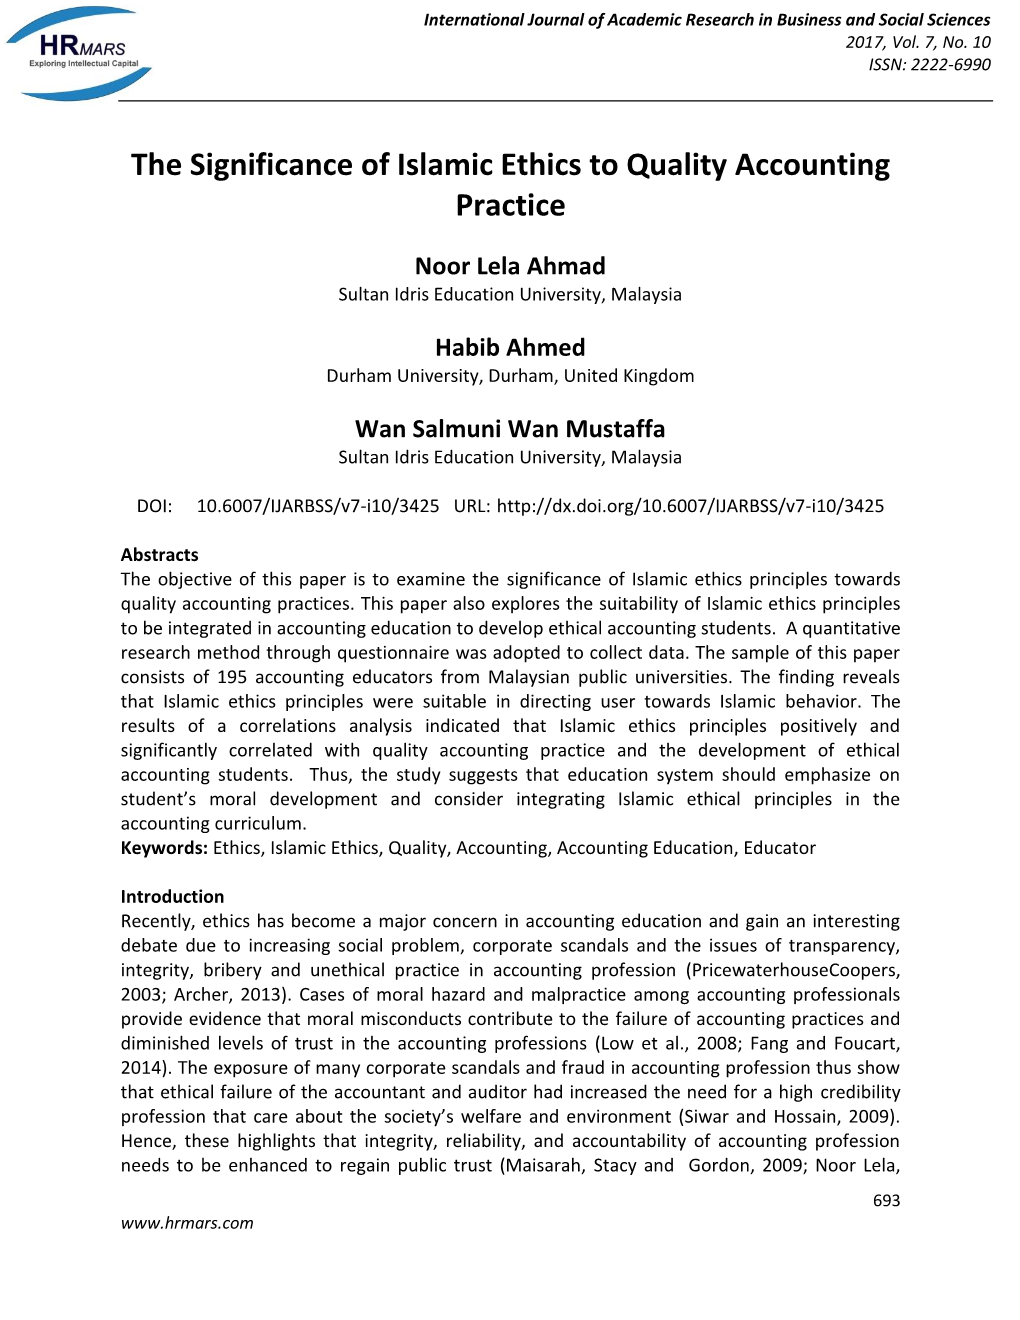 The Significance of Islamic Ethics to Quality Accounting Practice